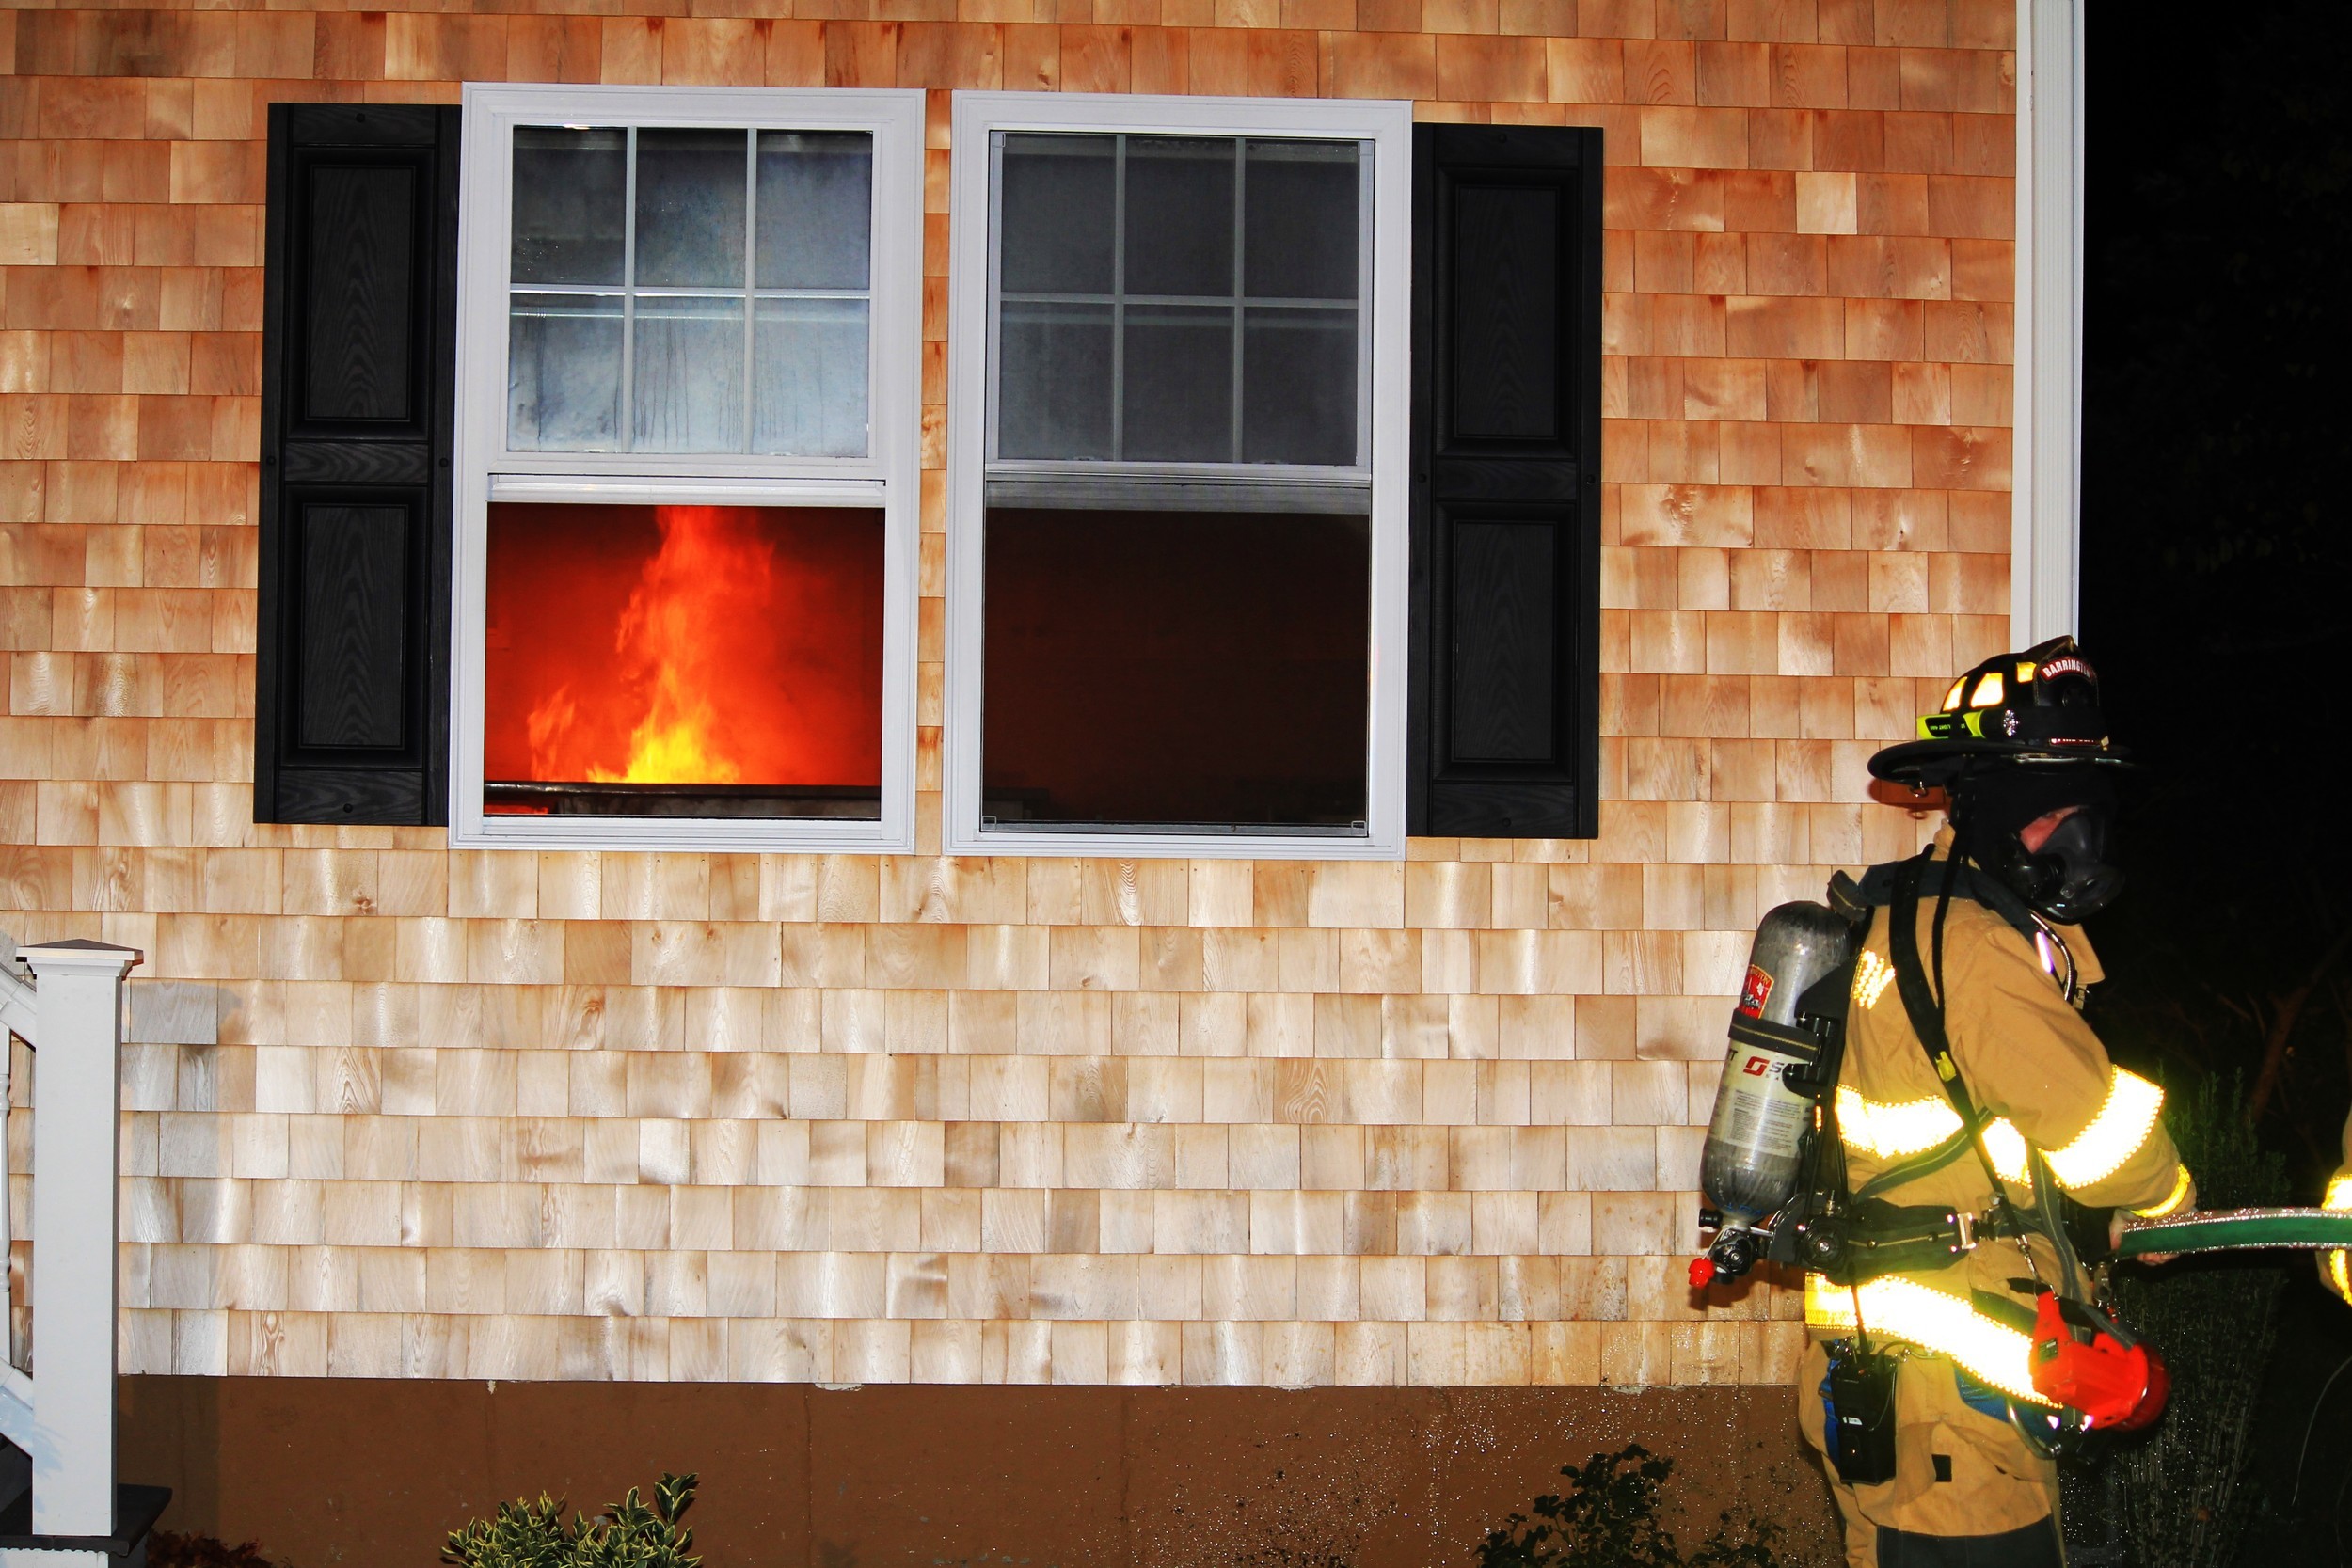 Flames can be seen inside the home at 2 Northwest Passage on Wednesday night, Nov. 2.